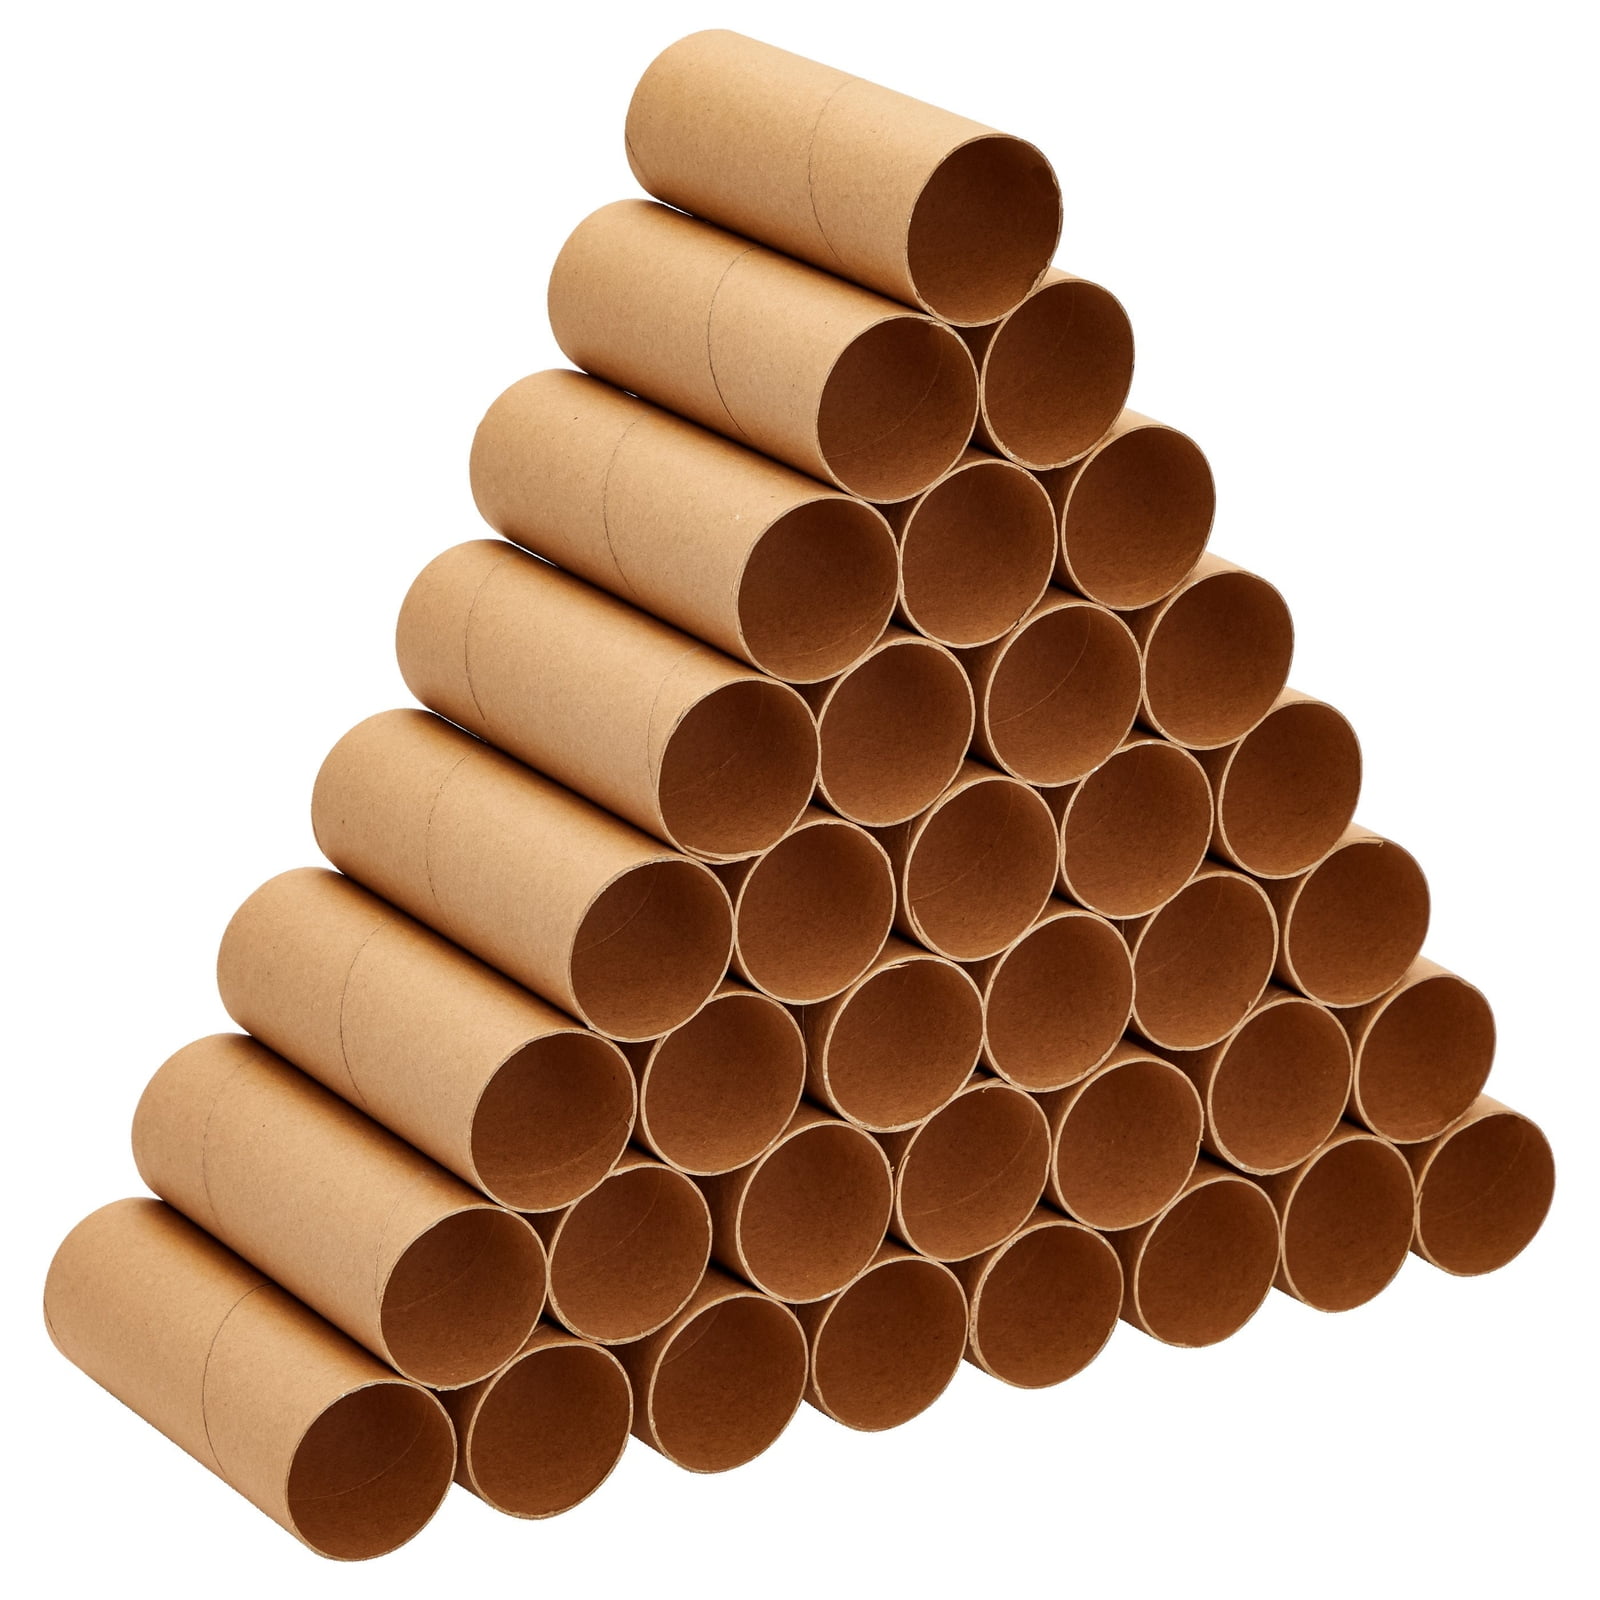 White Cardboard Tubes for Crafts, DIY Craft Paper Roll (3 Sizes